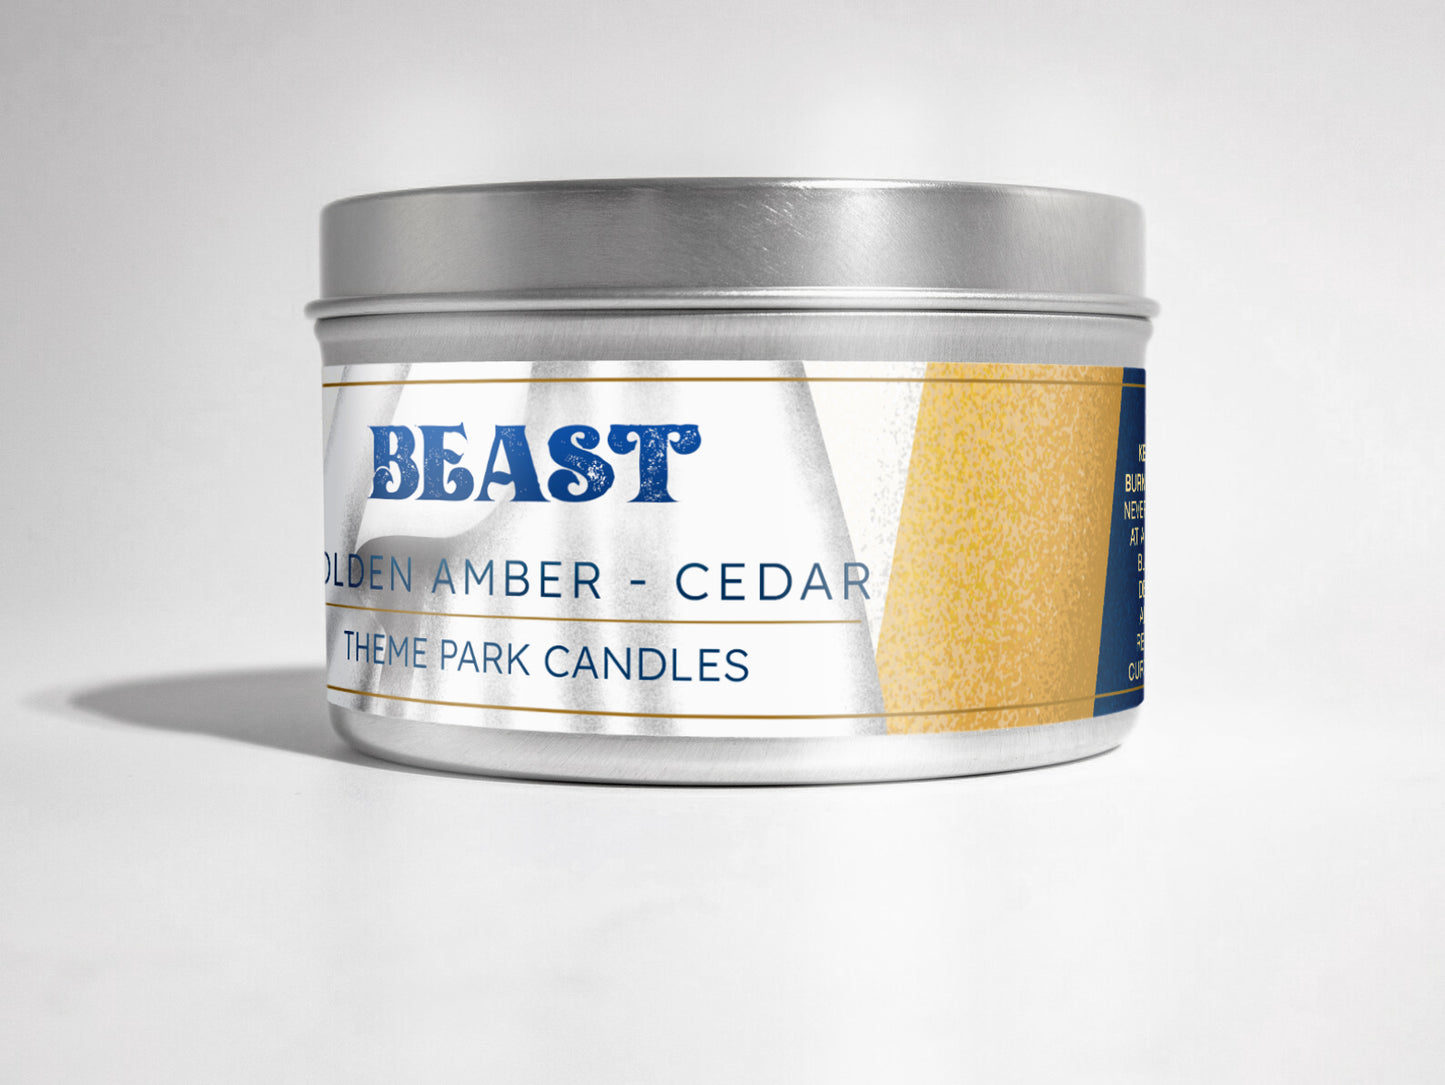 Beast Candle | Theme Park Candles | 6.5 oz Scented Soy Wax Blend Candle